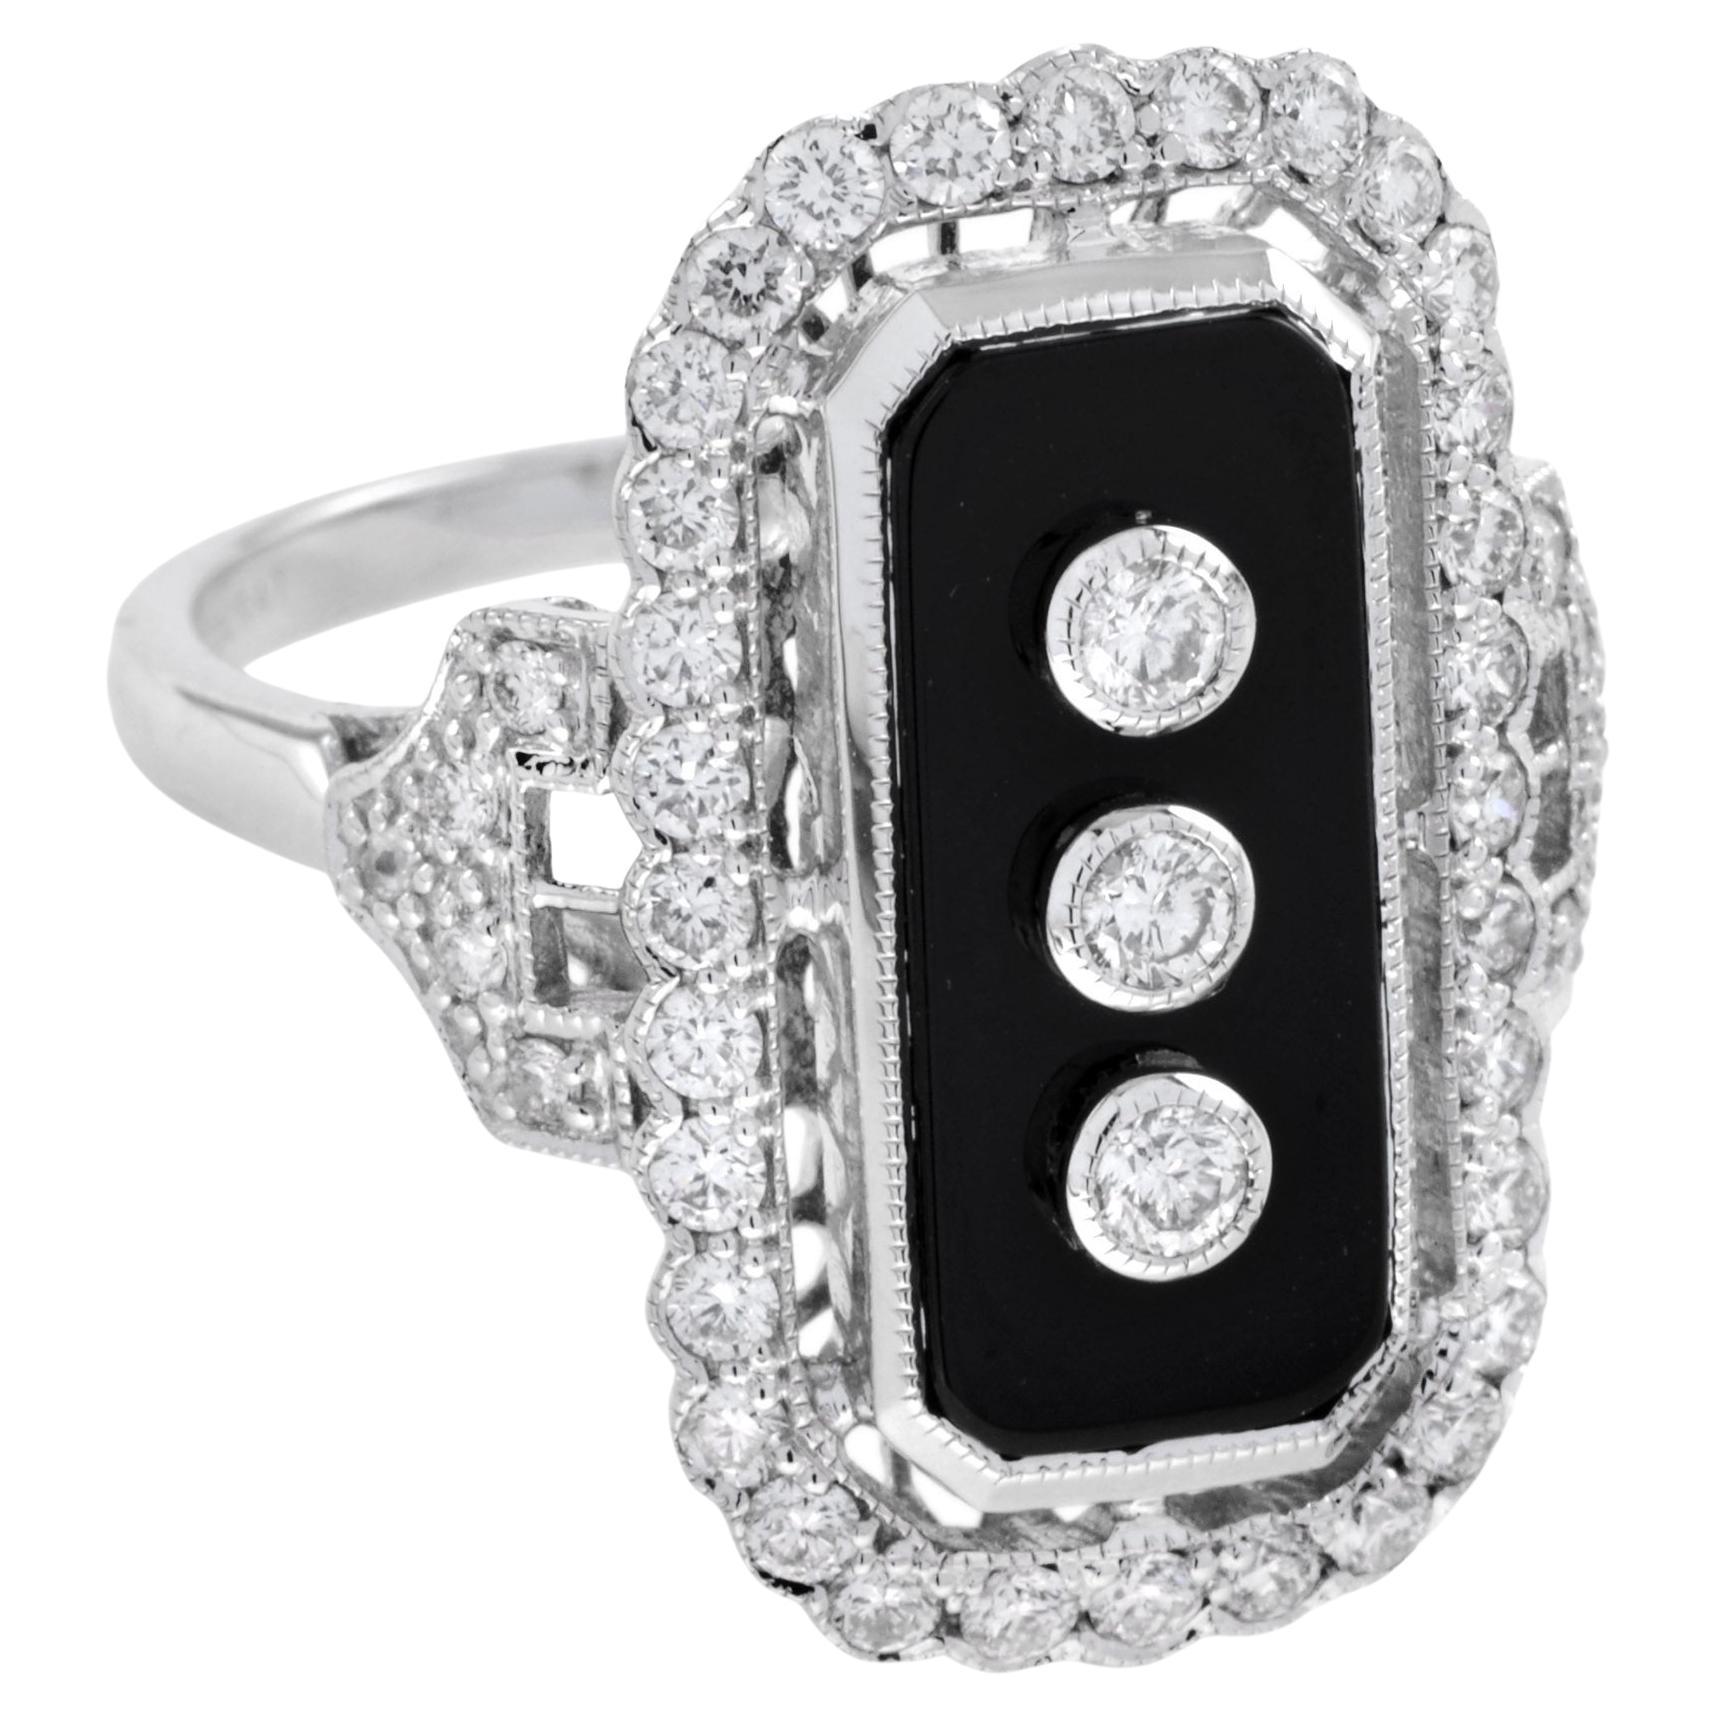 For Sale:  Art Deco Style Diamond and Onyx Ring in 18K White Gold